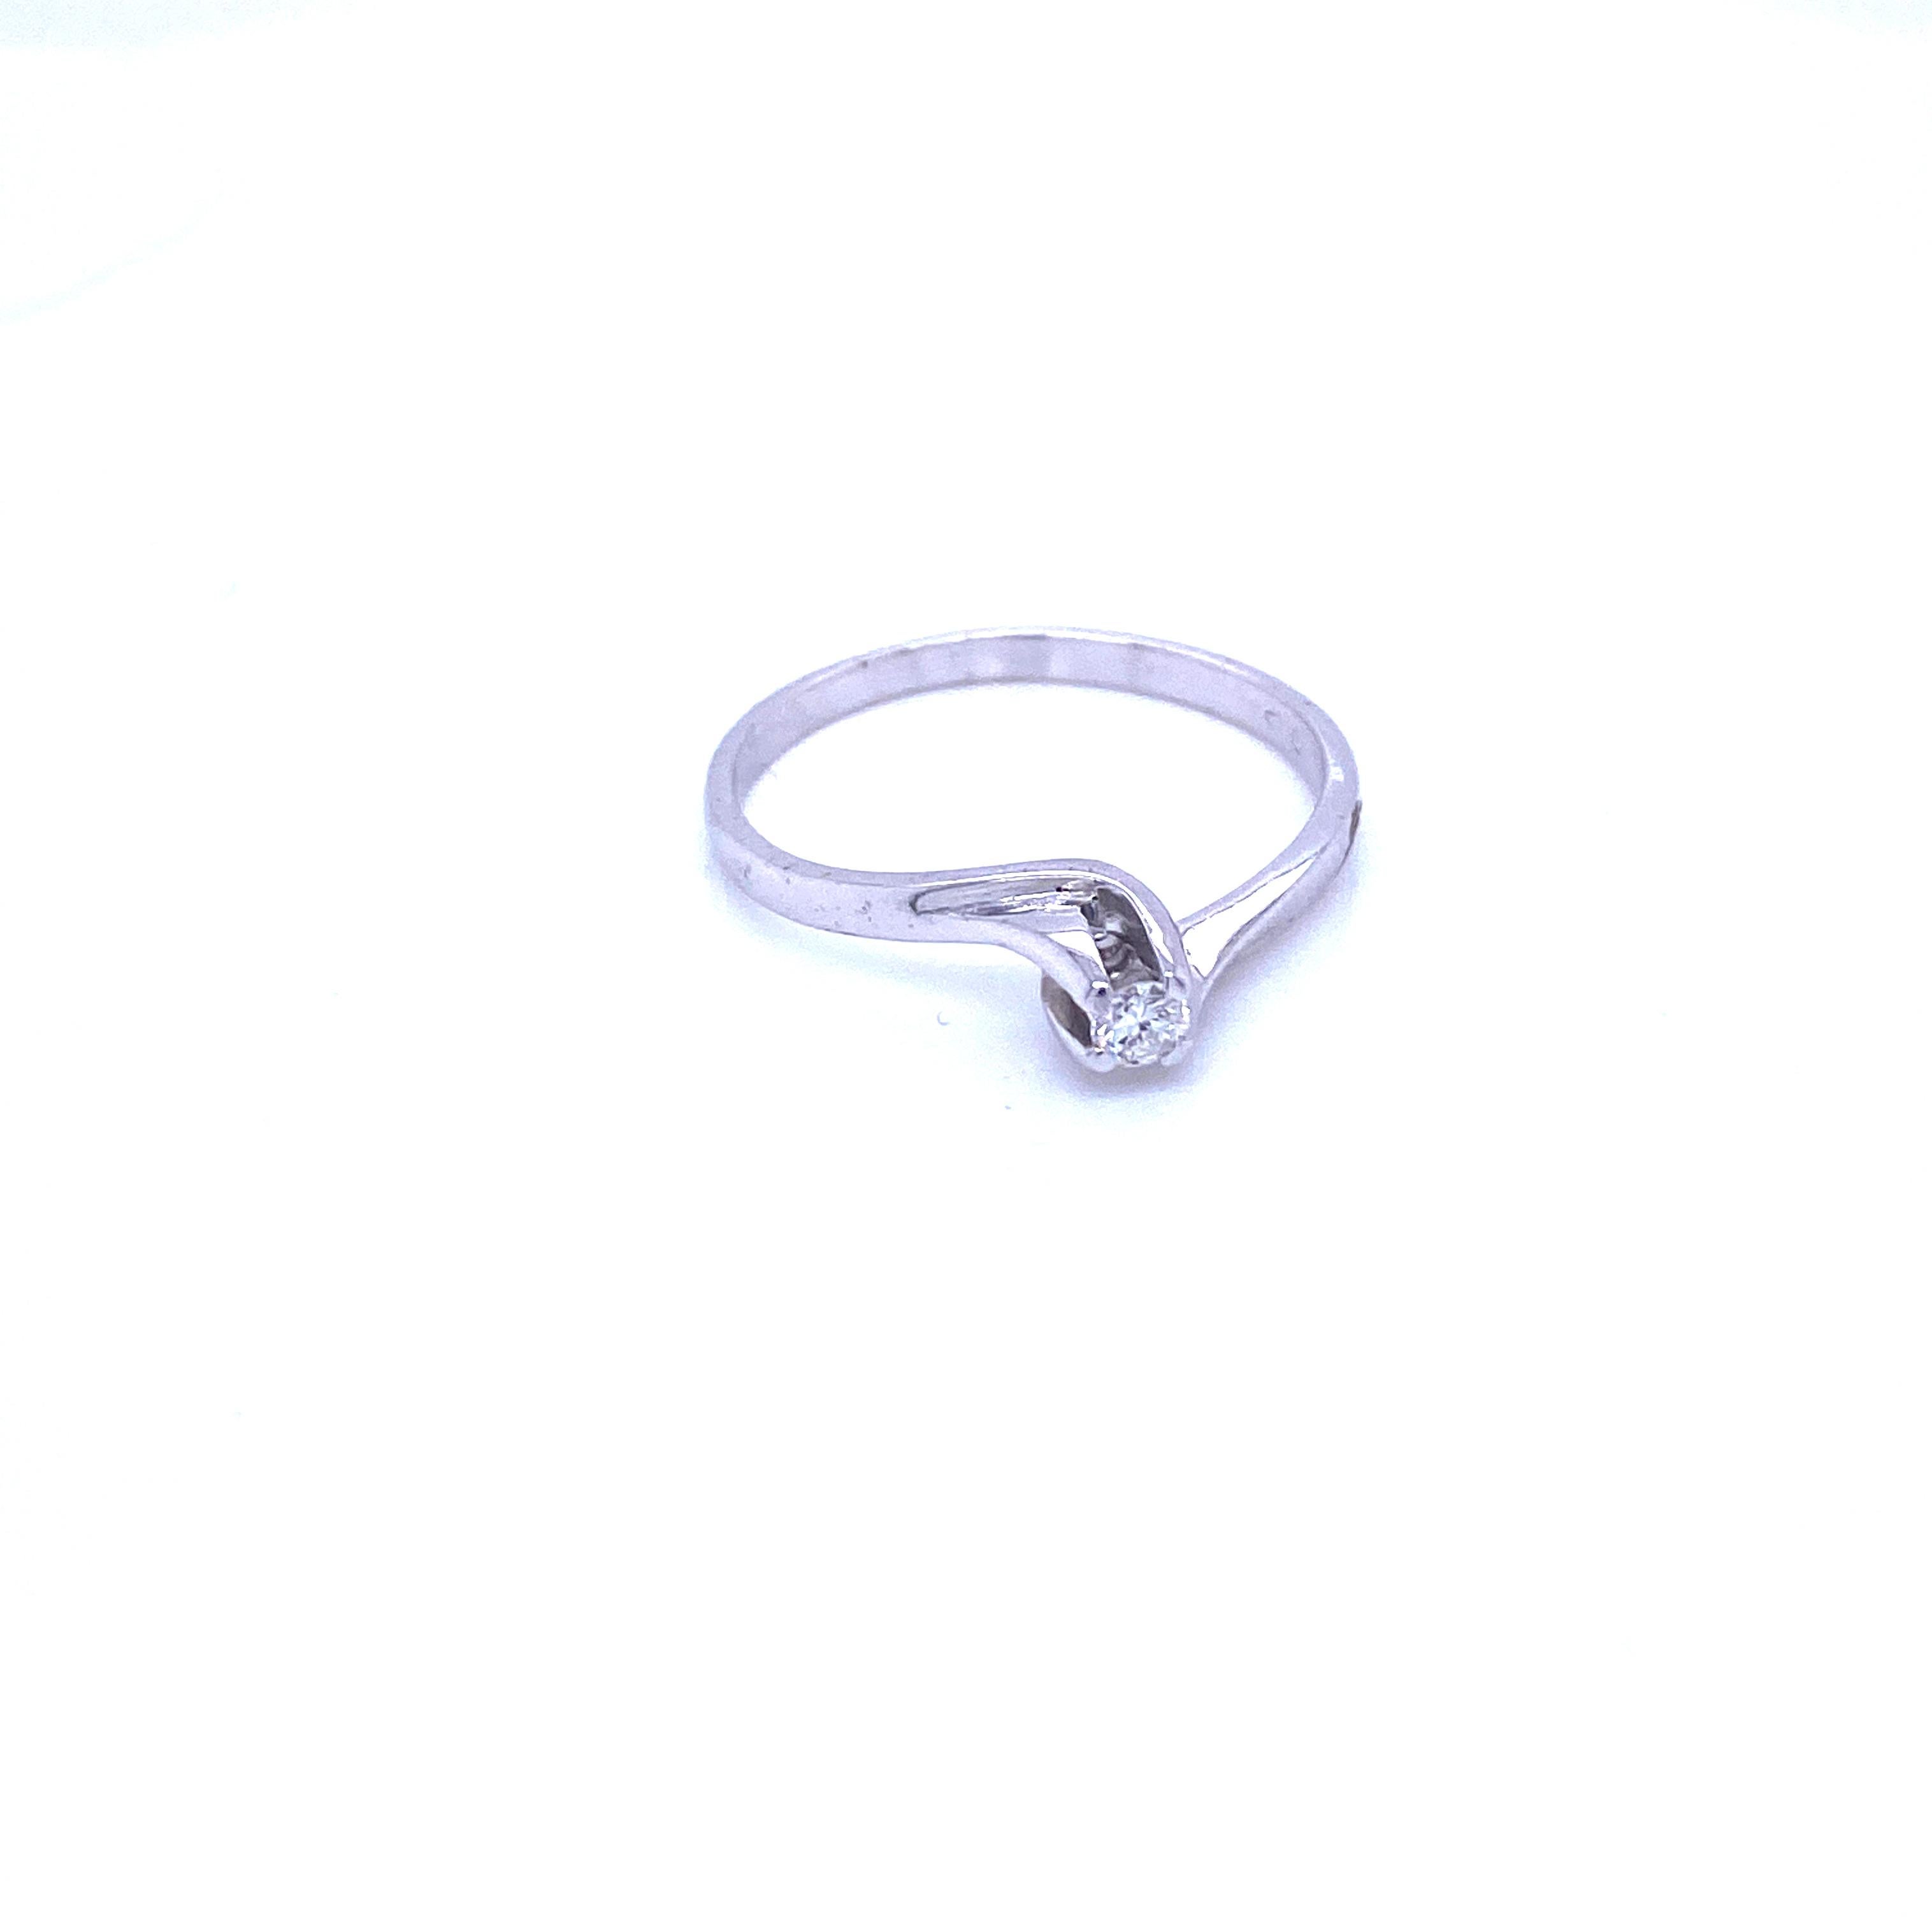 Elegant solitaire engagement ring handmade in 18k white gold.
It is centered with a sparkling Round brilliant cut Diamond of .12 carat, graded G color and Vvs clarity. 

Condition: Excellent
Ring Size: US 8 - IT 17 - FR 57 - UK Q. Resizable on